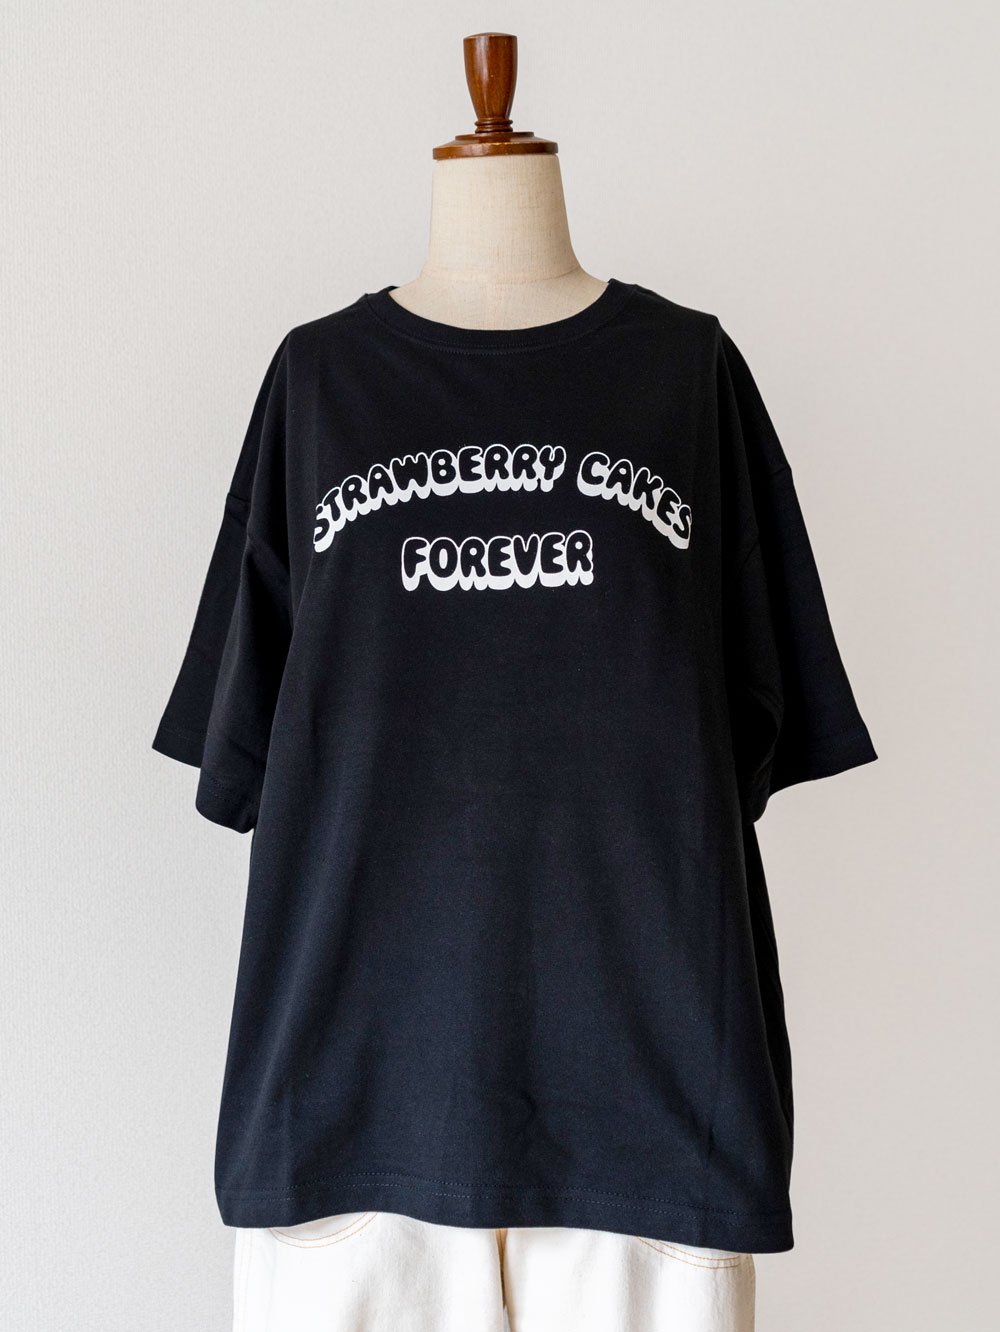 T-Shirt「STRAWBERRY CAKES FOREVER」黒